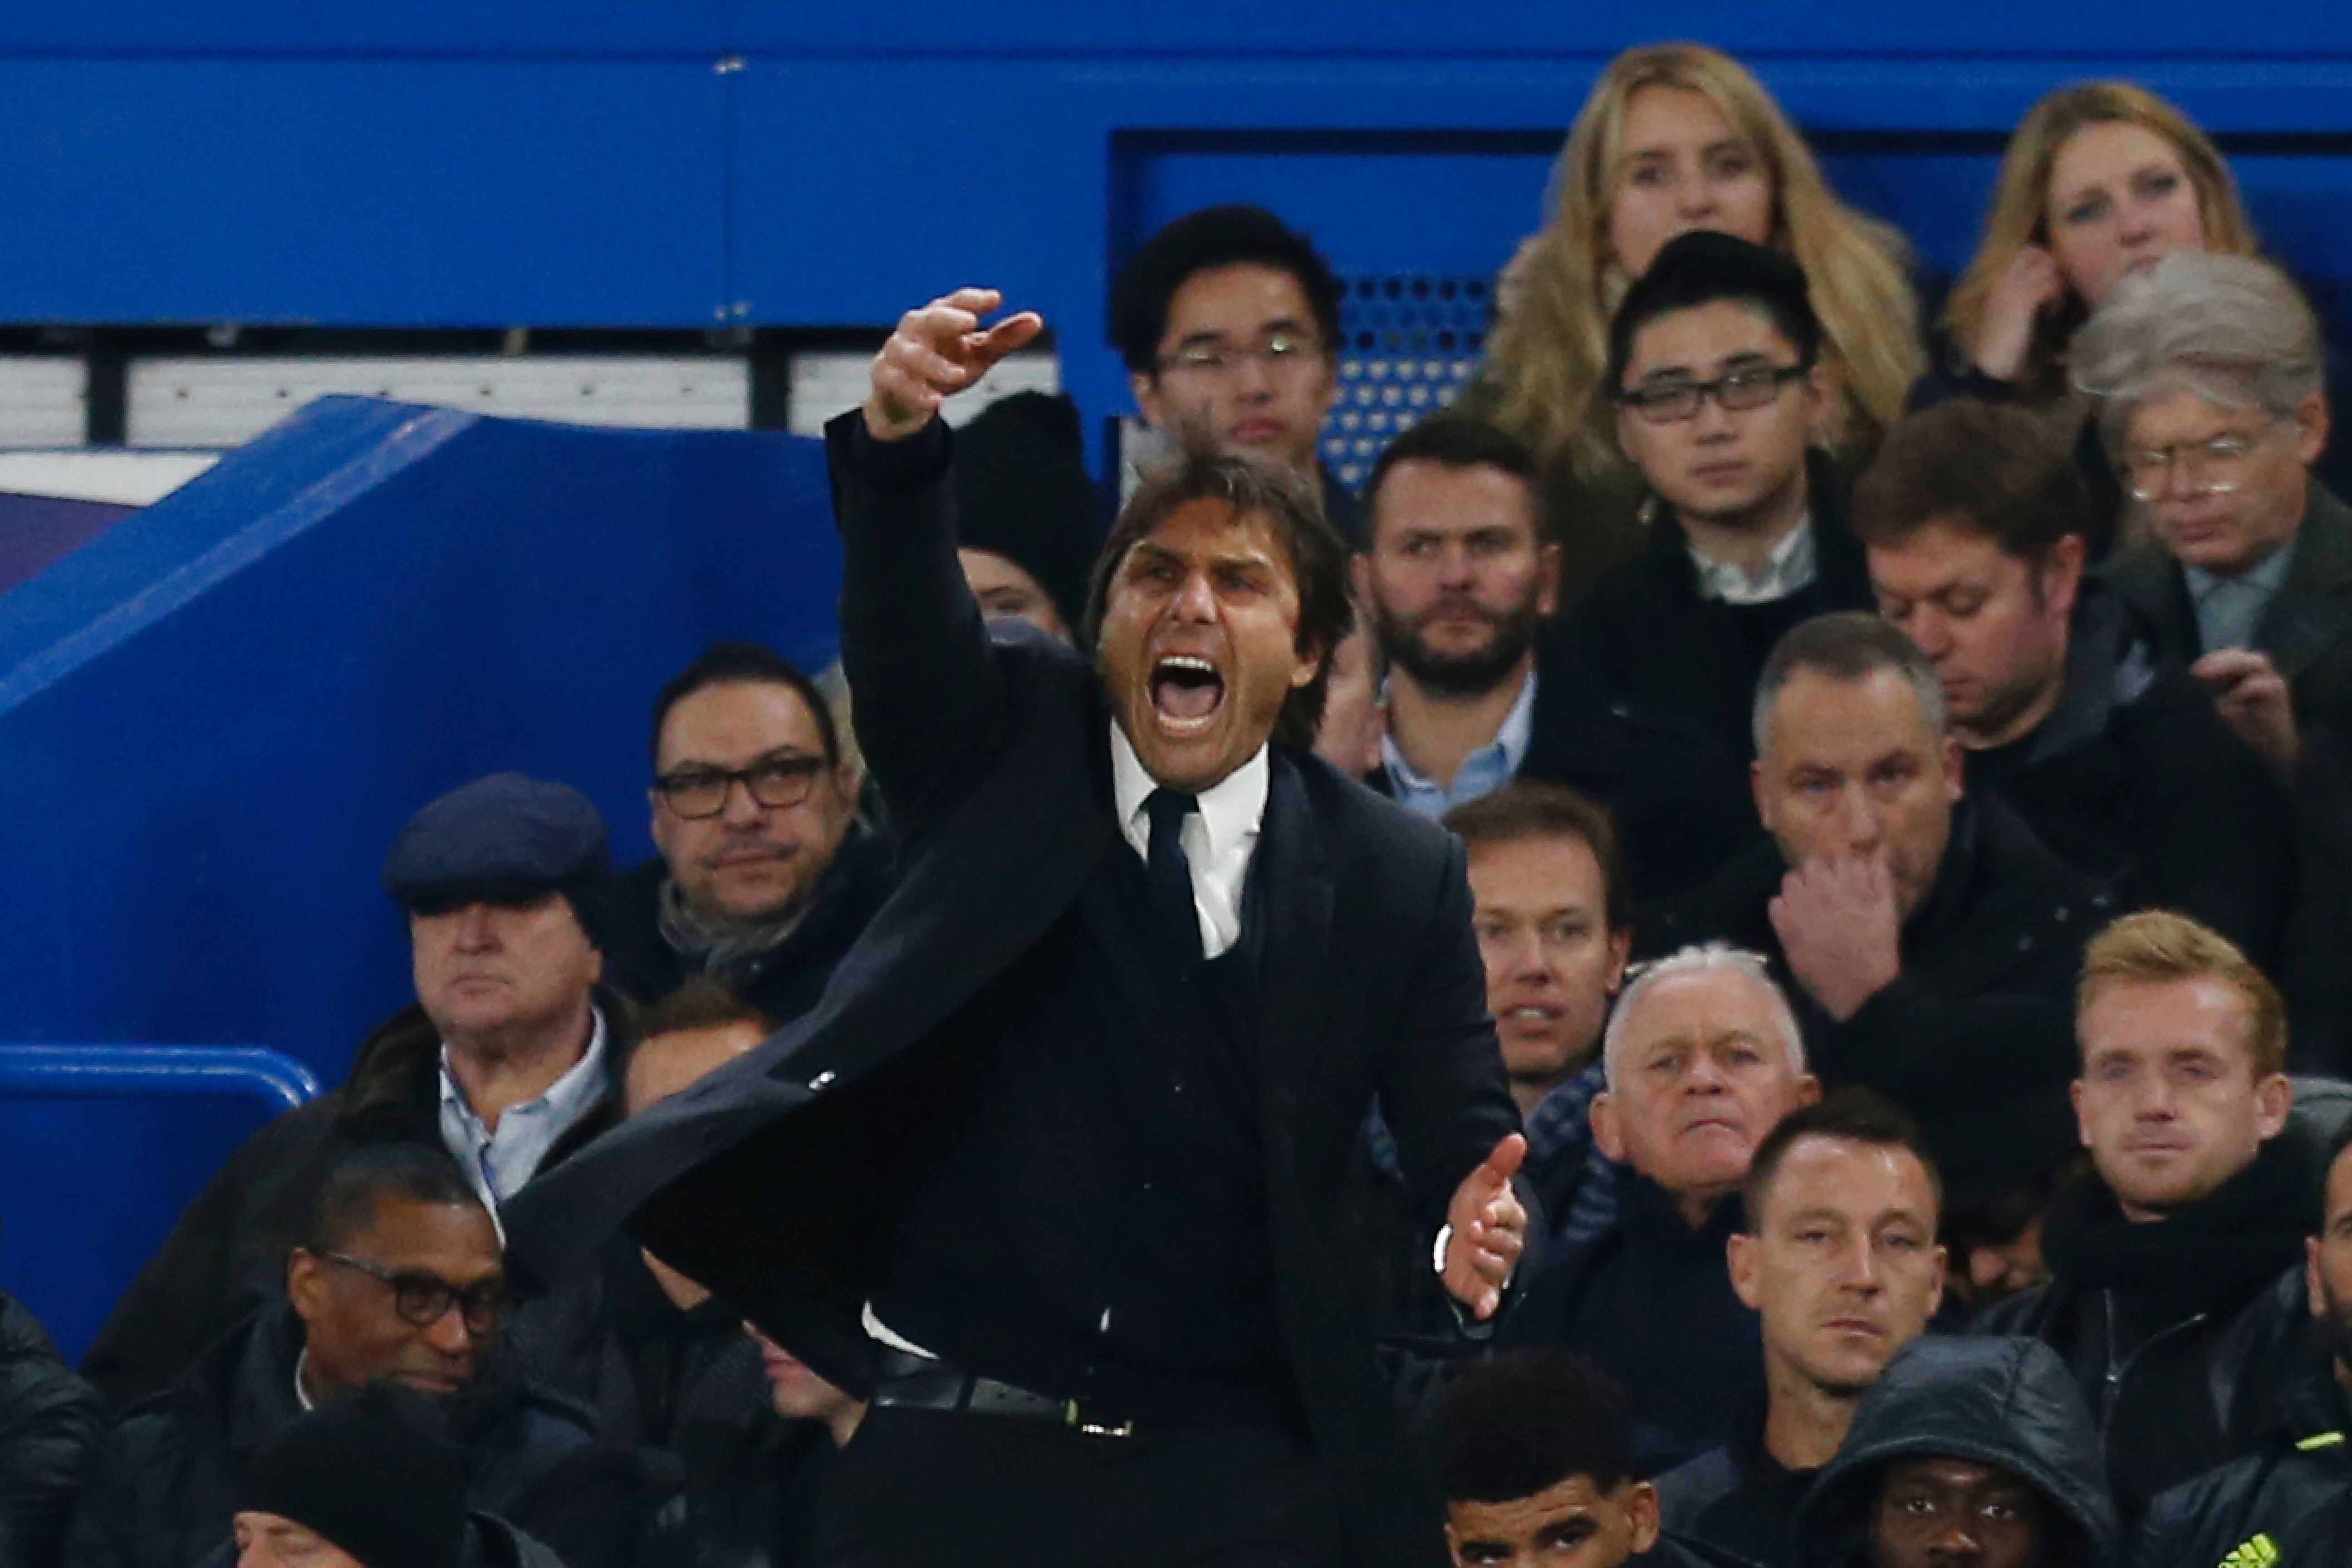 Chelsea's Italian head coach Antonio Conte gestures from the touchline during the English Premier League football match between Chelsea and Tottenham Hotspur at Stamford Bridge in London on November 26, 2016. / AFP / Ian KINGTON / RESTRICTED TO EDITORIAL USE. No use with unauthorized audio, video, data, fixture lists, club/league logos or 'live' services. Online in-match use limited to 75 images, no video emulation. No use in betting, games or single club/league/player publications.  /         (Photo credit should read IAN KINGTON/AFP/Getty Images)